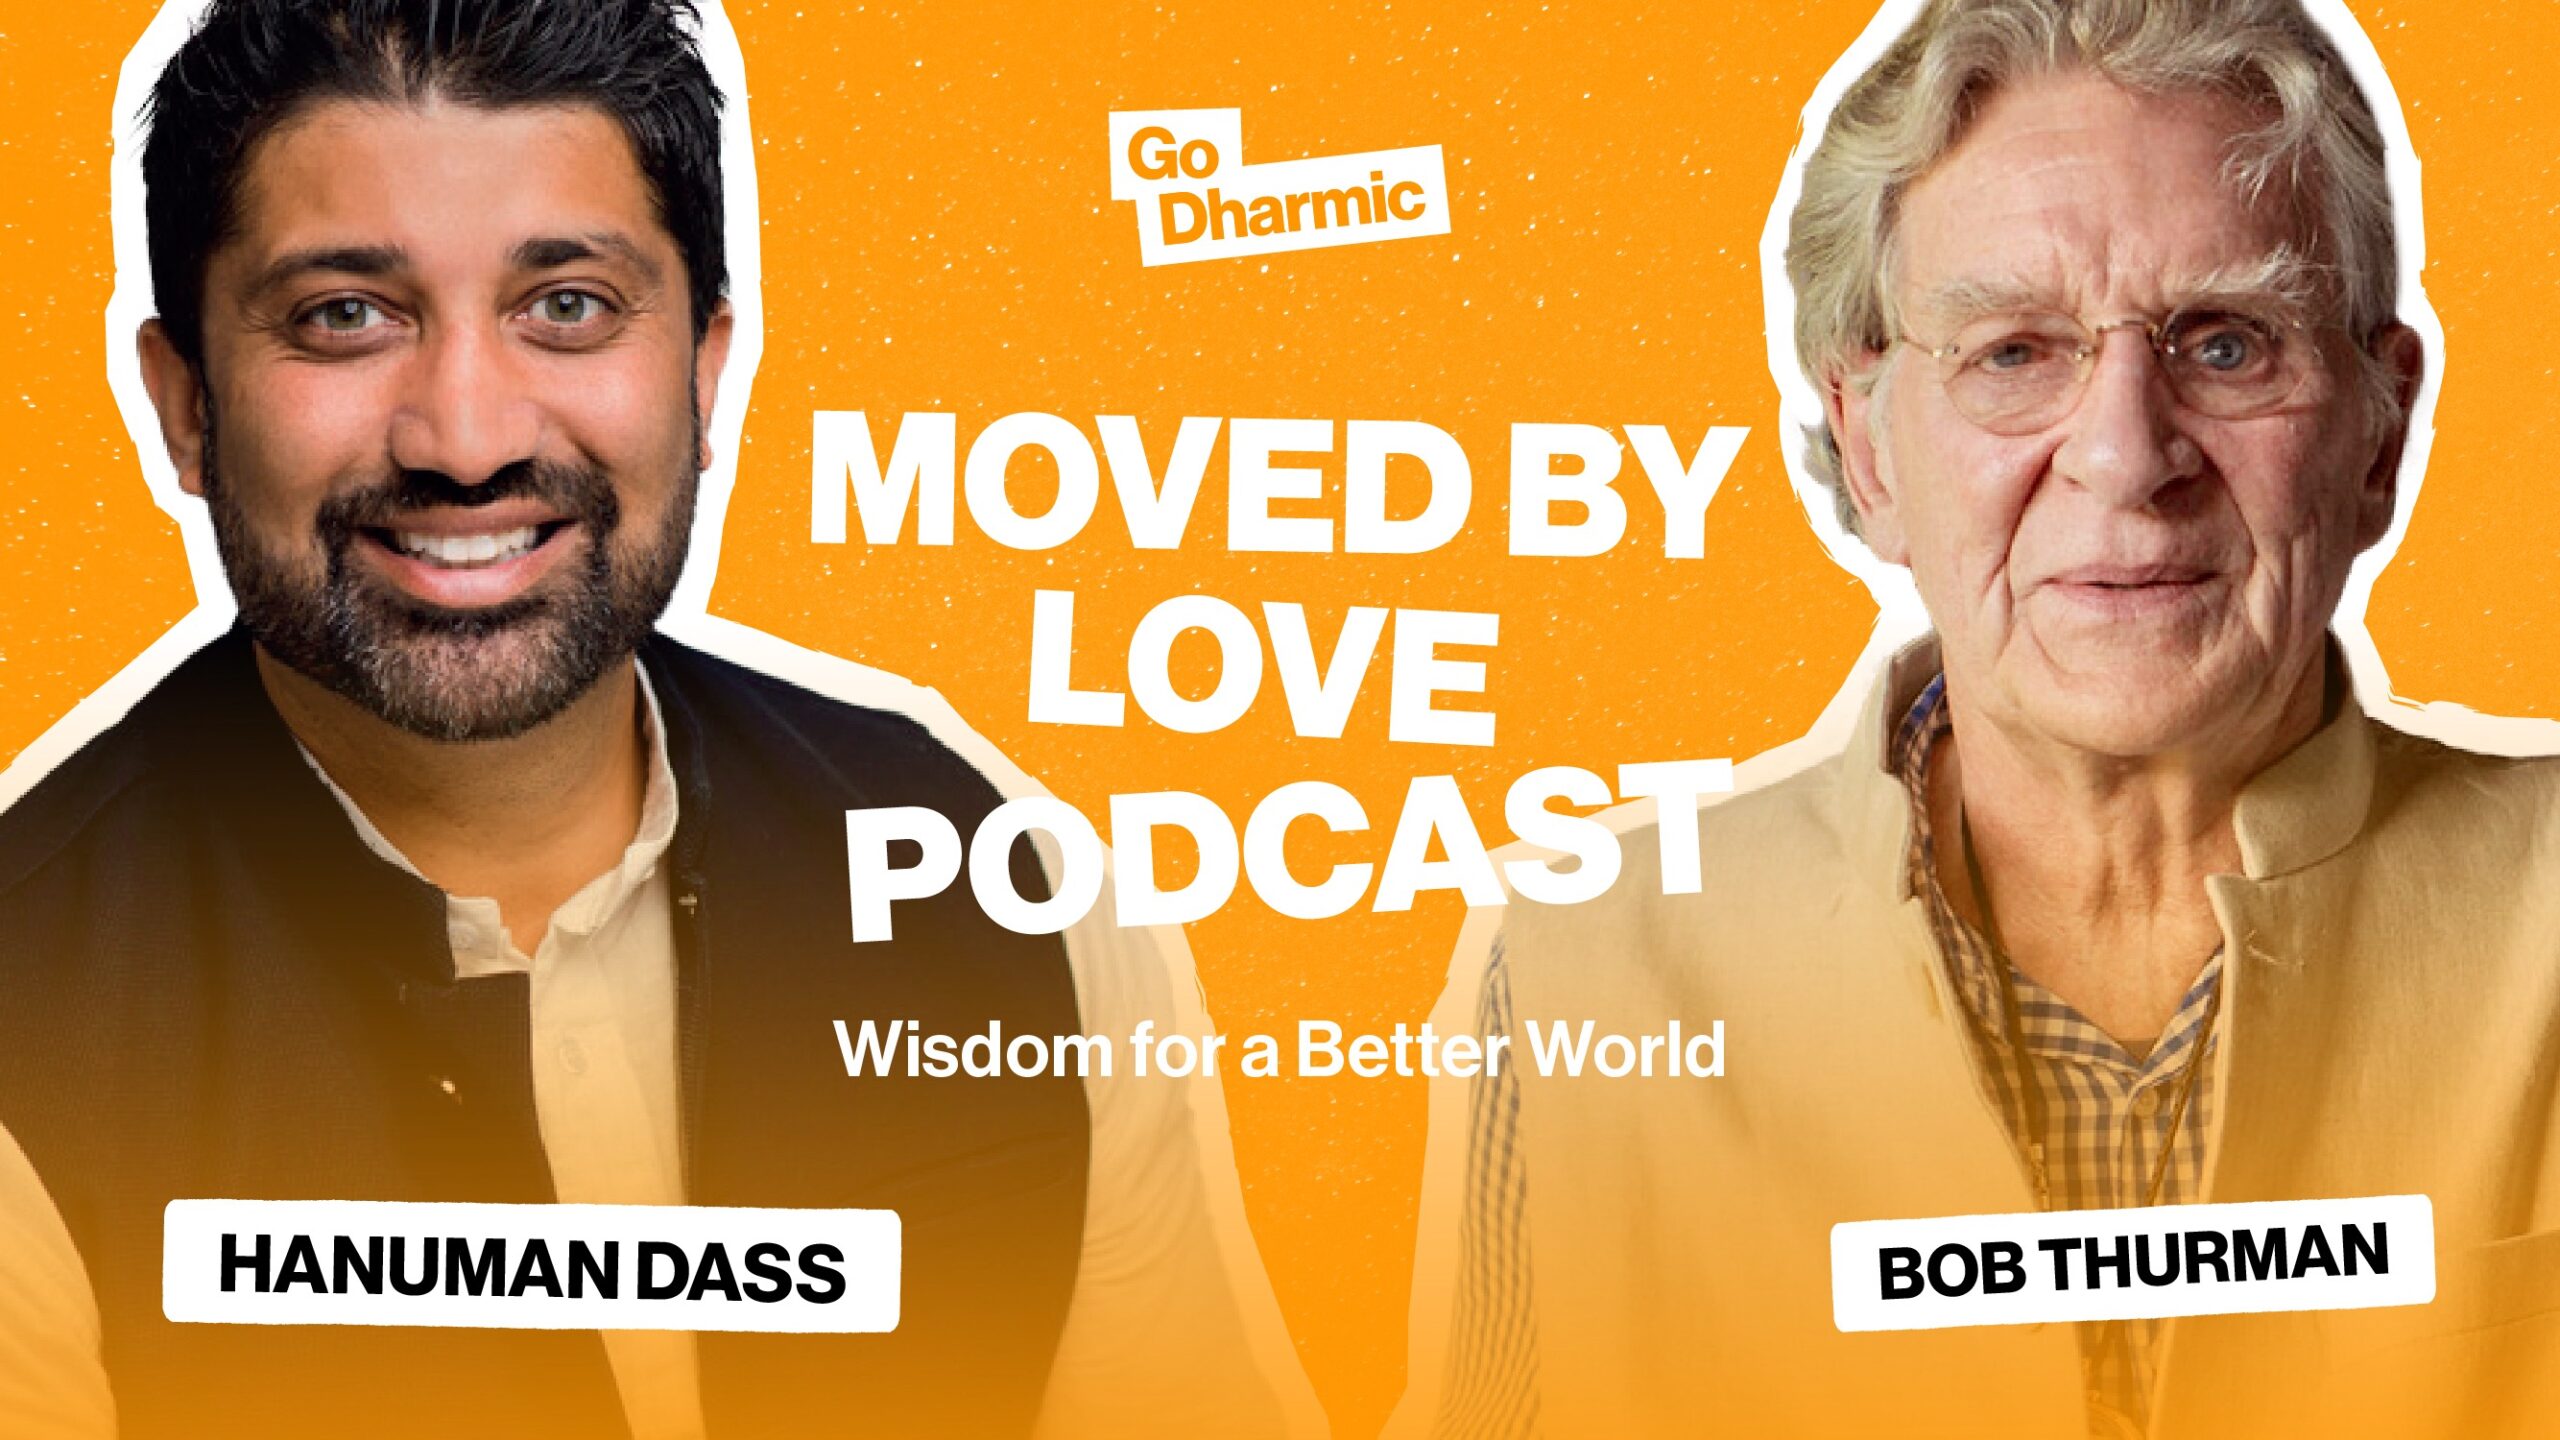 A black and white poster for the podcast "Moved by Love." The poster features text in various sizes and fonts including "Go Dharmic," "Wisdom for a Better World," "Moved by Love Podcast," and the names "Hanuman Dass" and "Bob Thurman."